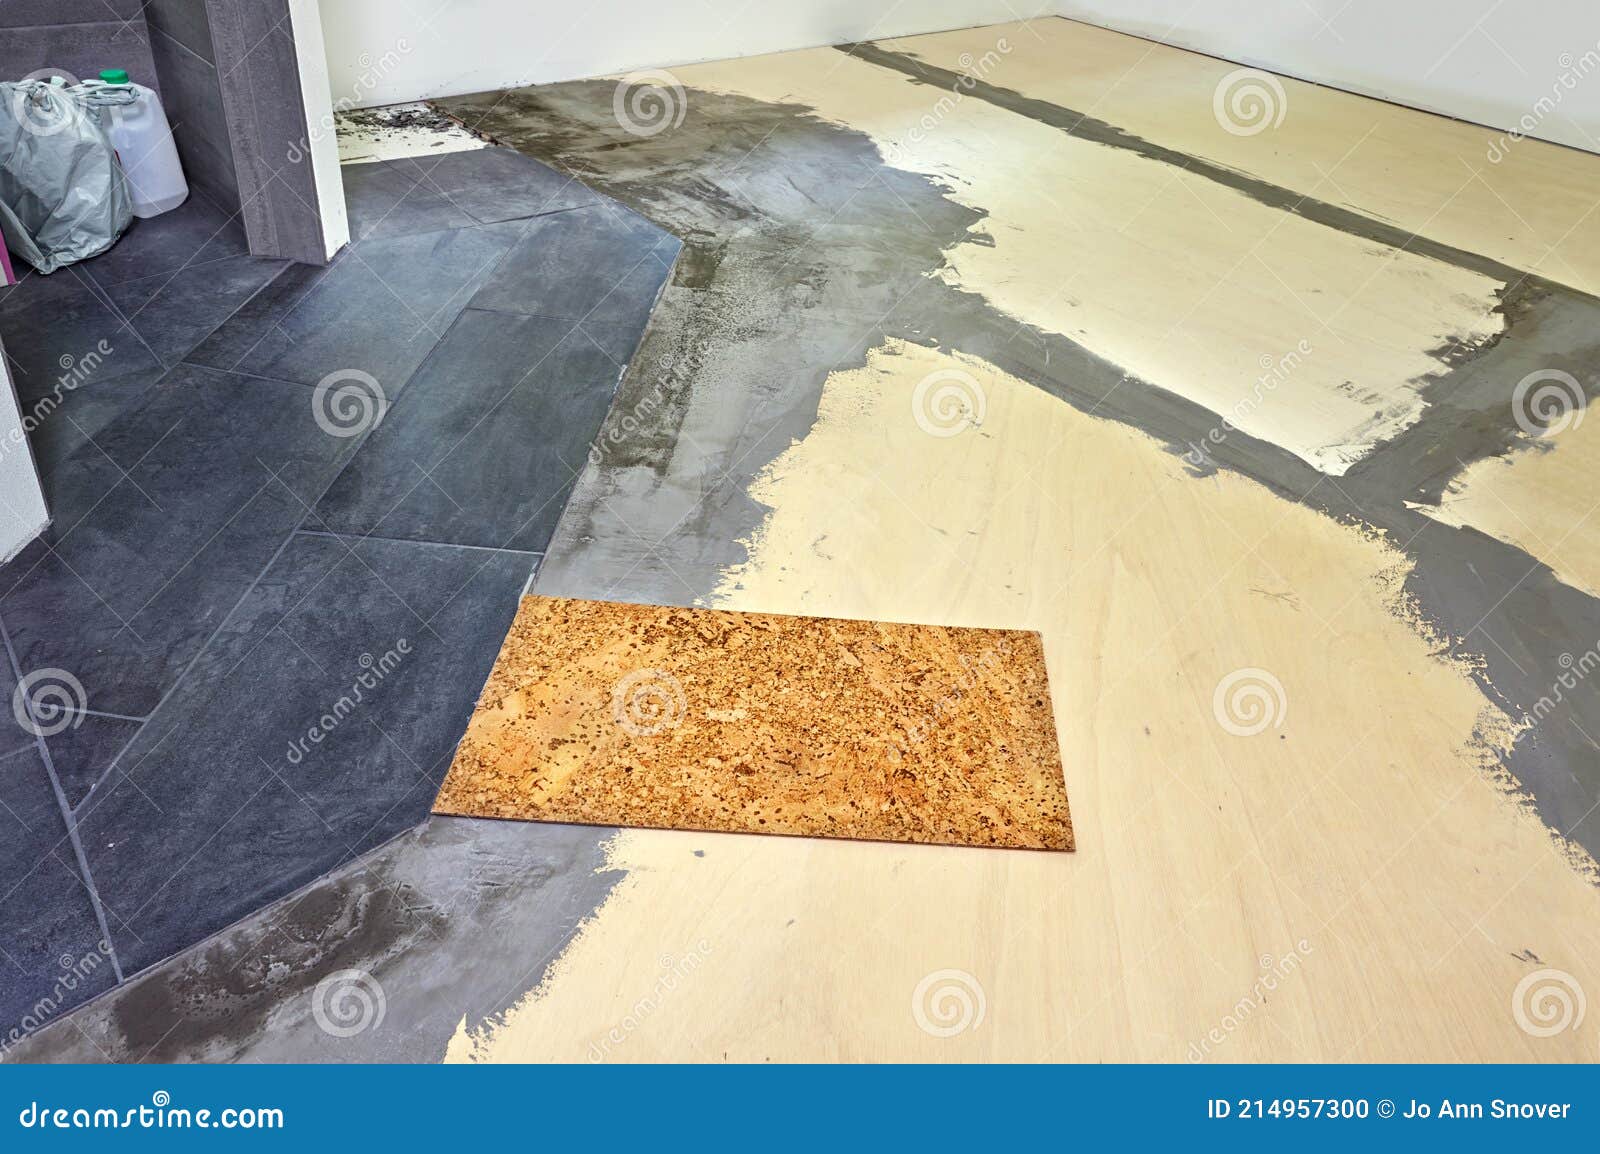 342 Subfloor Photos Free Royalty Free Stock Photos From Dreamstime